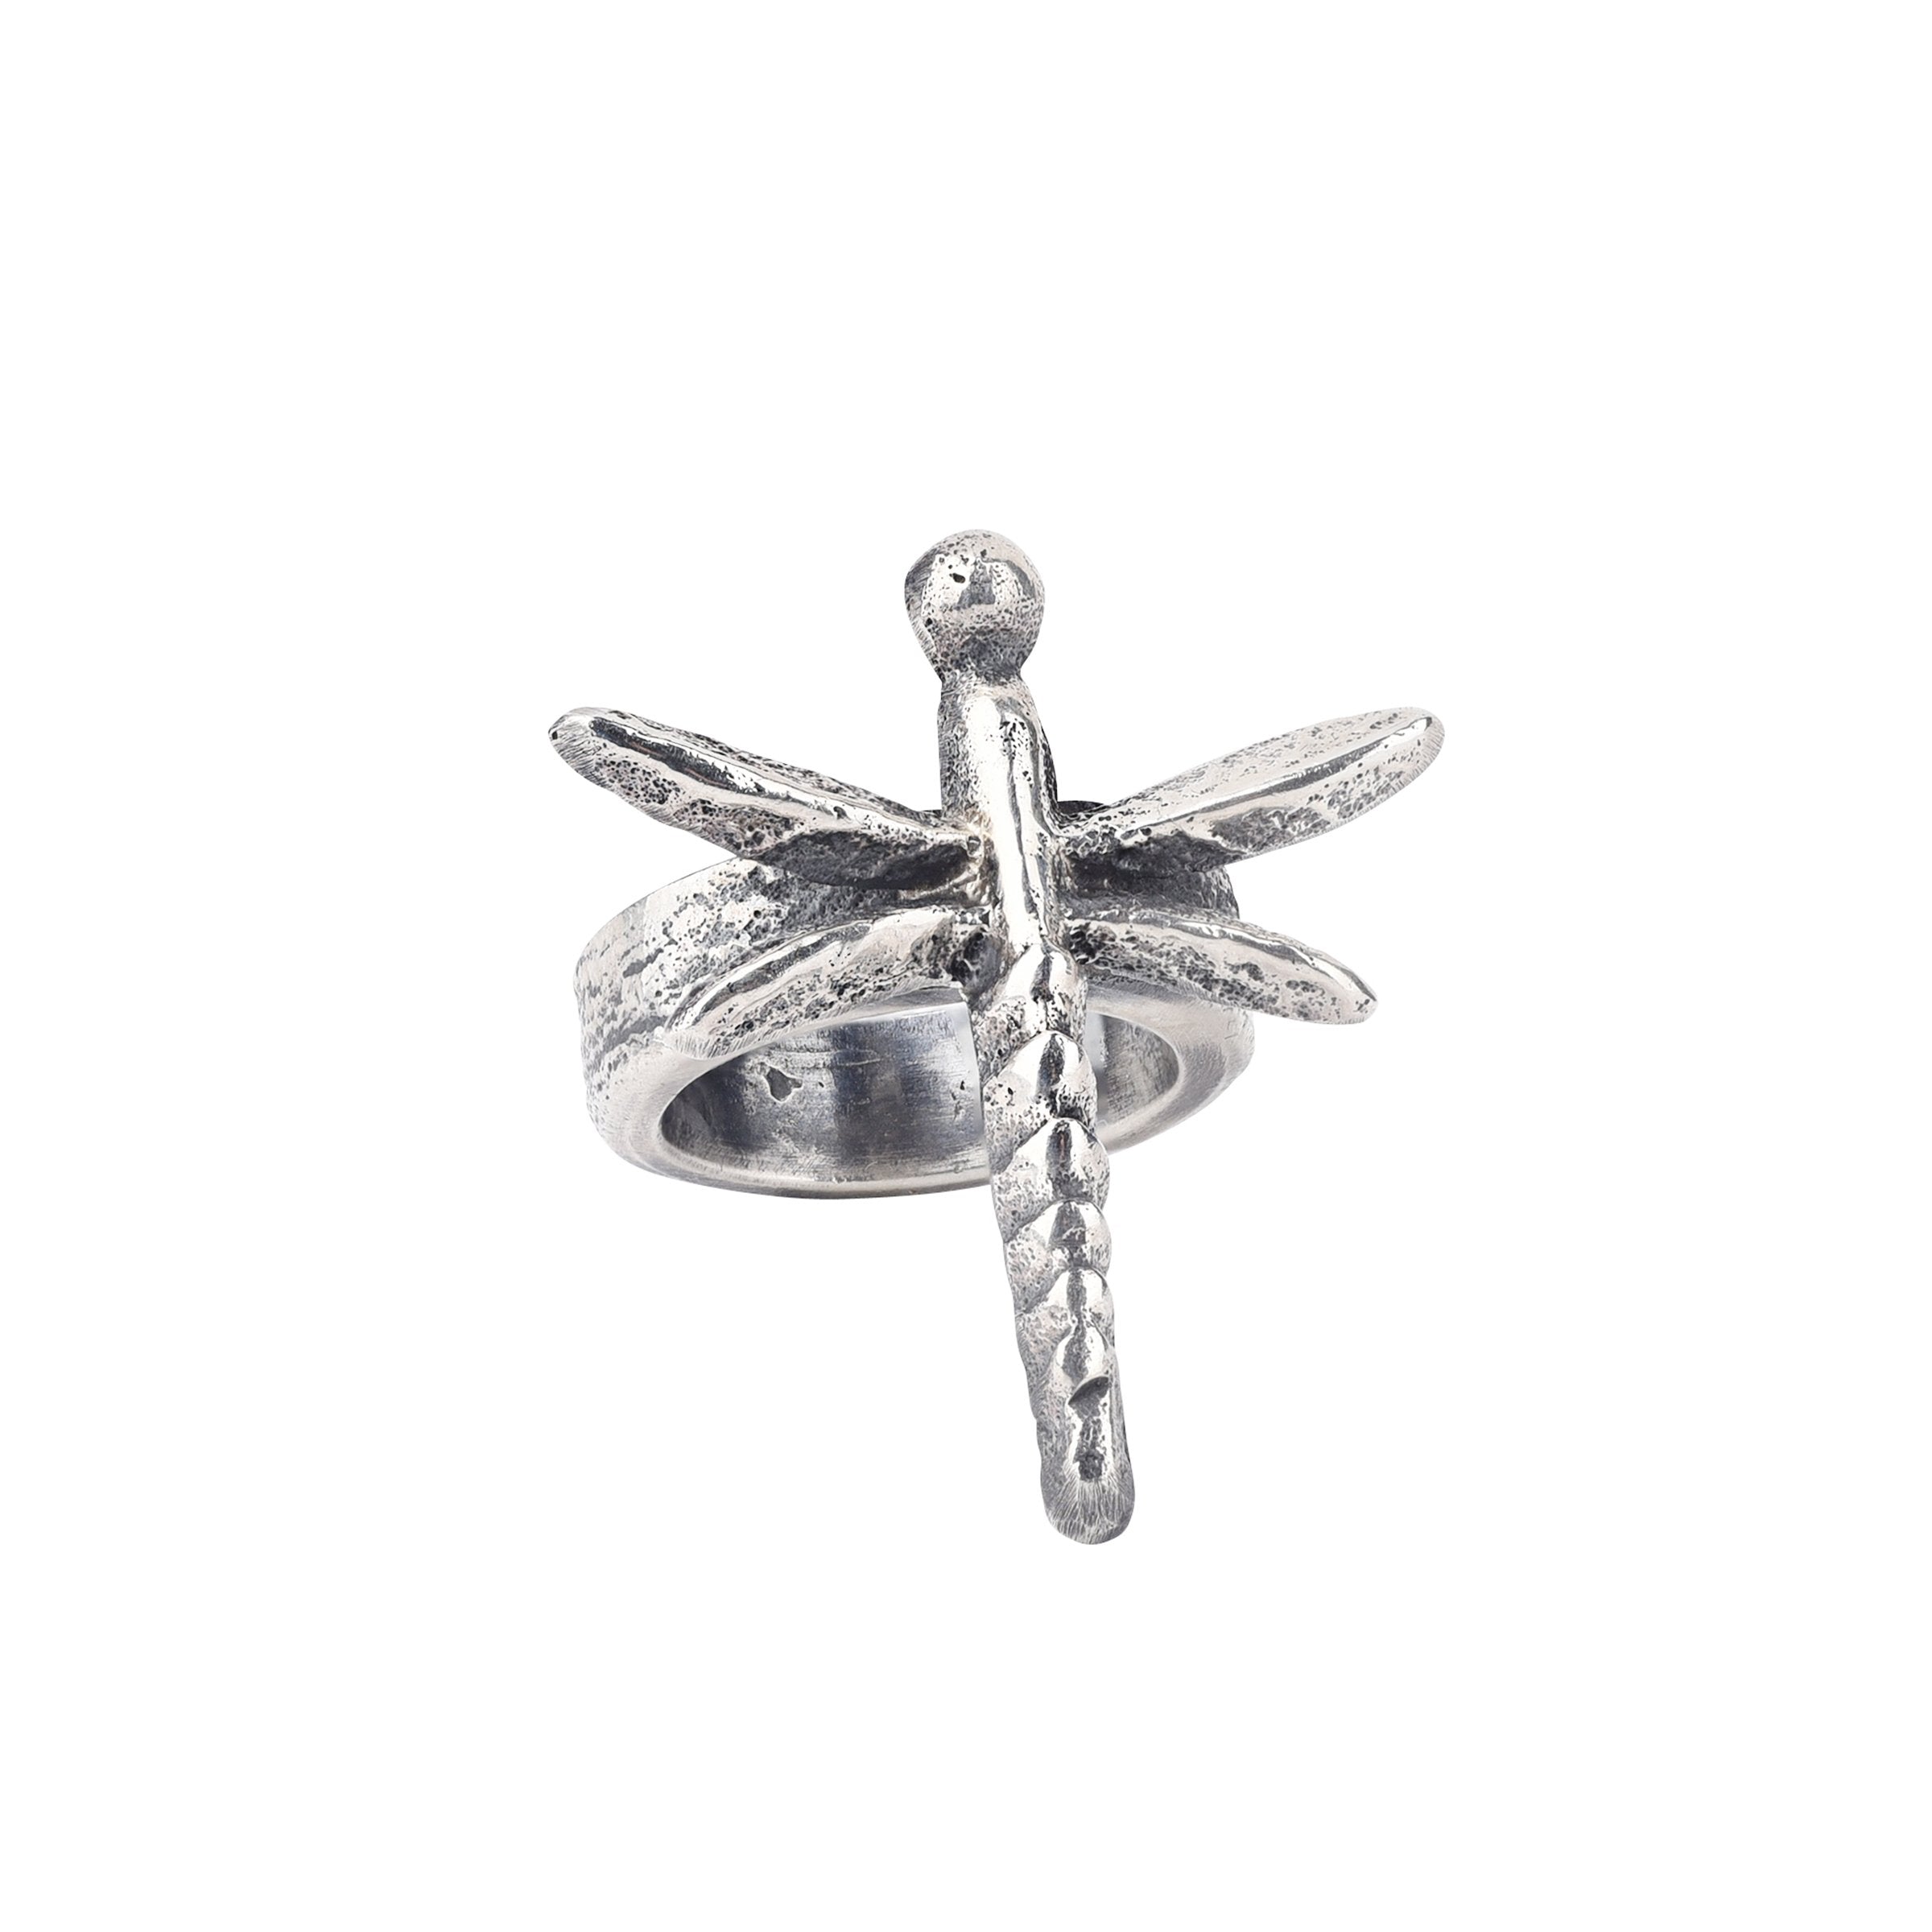 Gary Custer Dragonfly Ring - Size 6 1/2